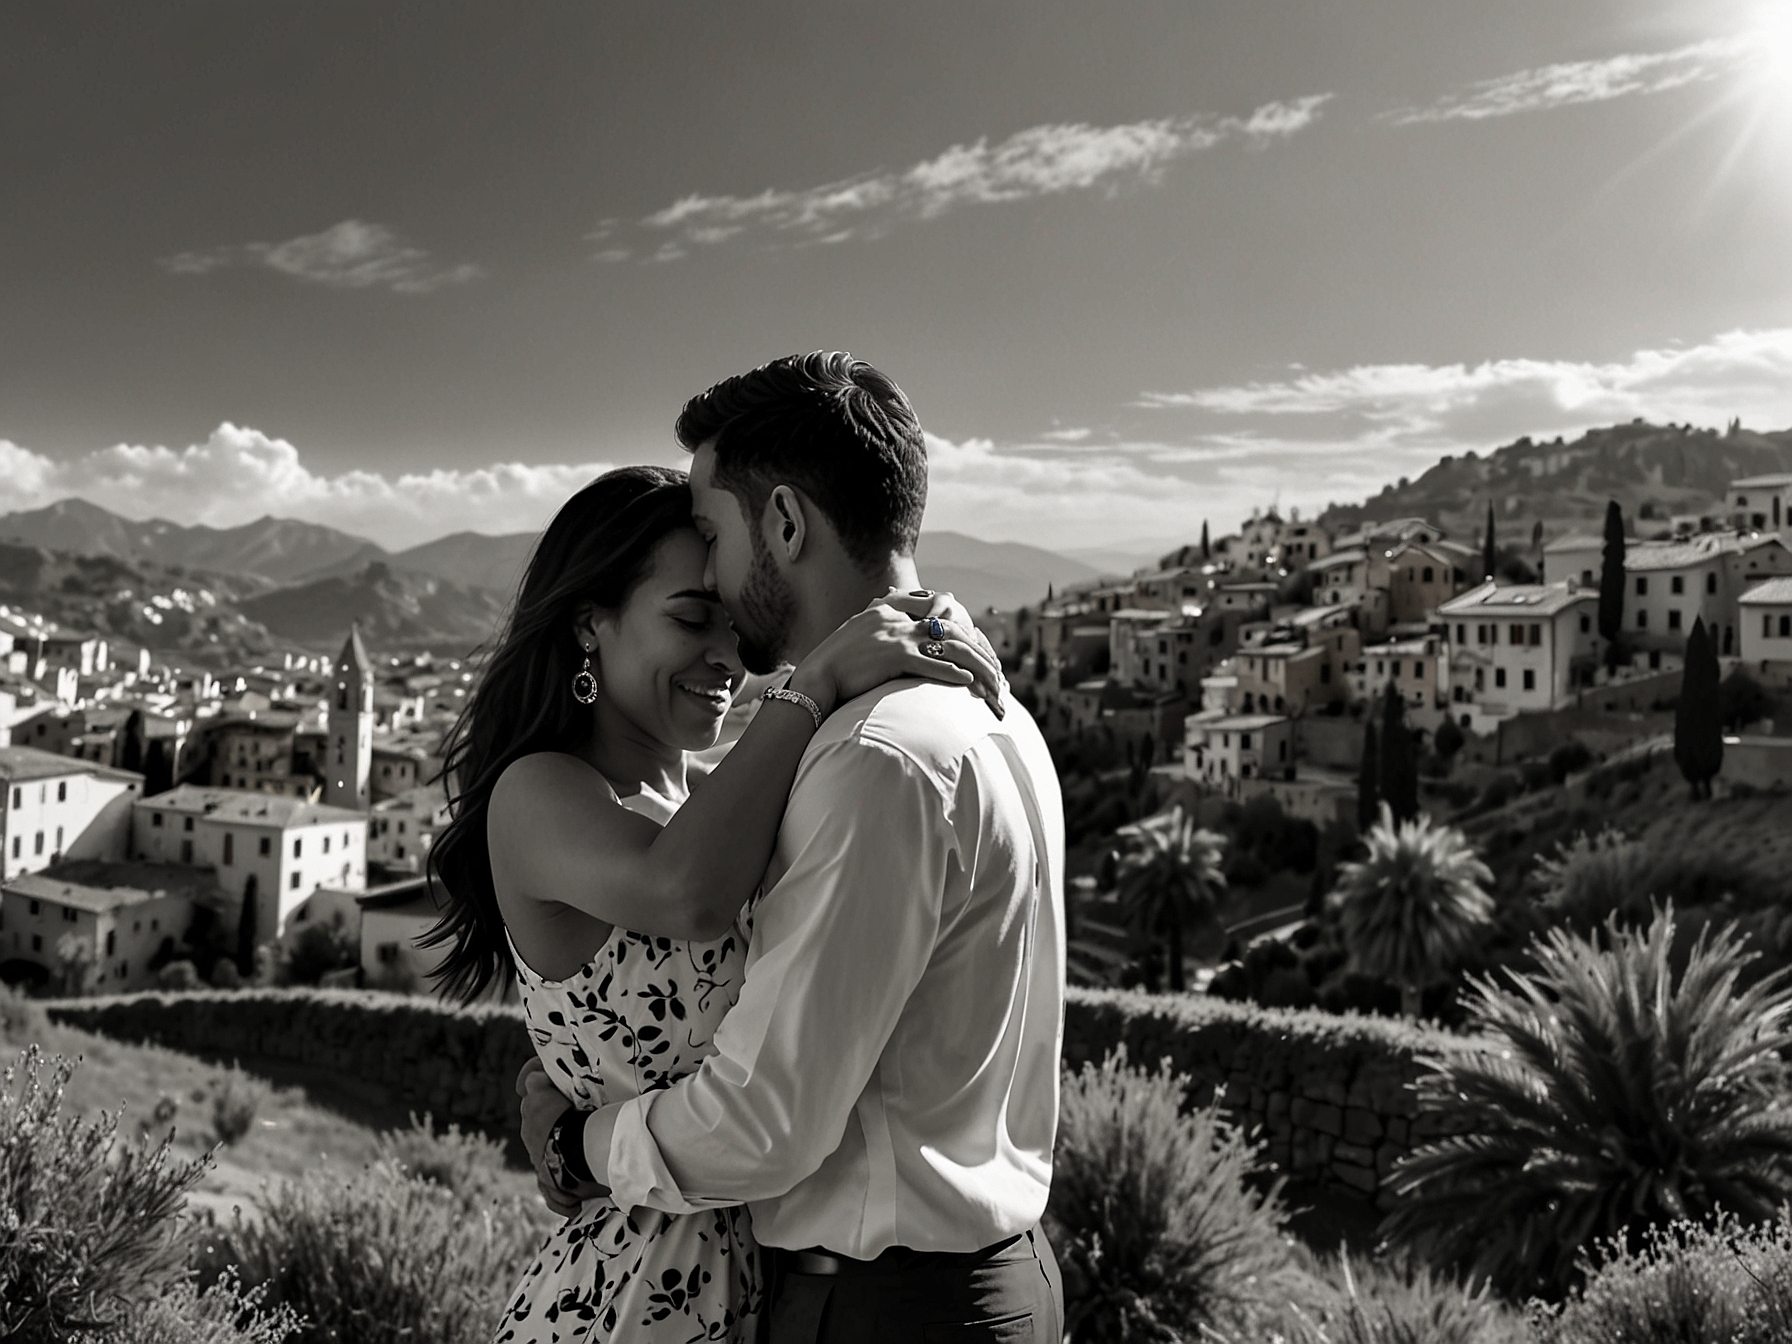 The couple, Jordan Love and Ronika Stone, celebrate their engagement in Italy, showcasing the sparkling engagement ring and their happiness as they embrace amidst scenic Italian views.